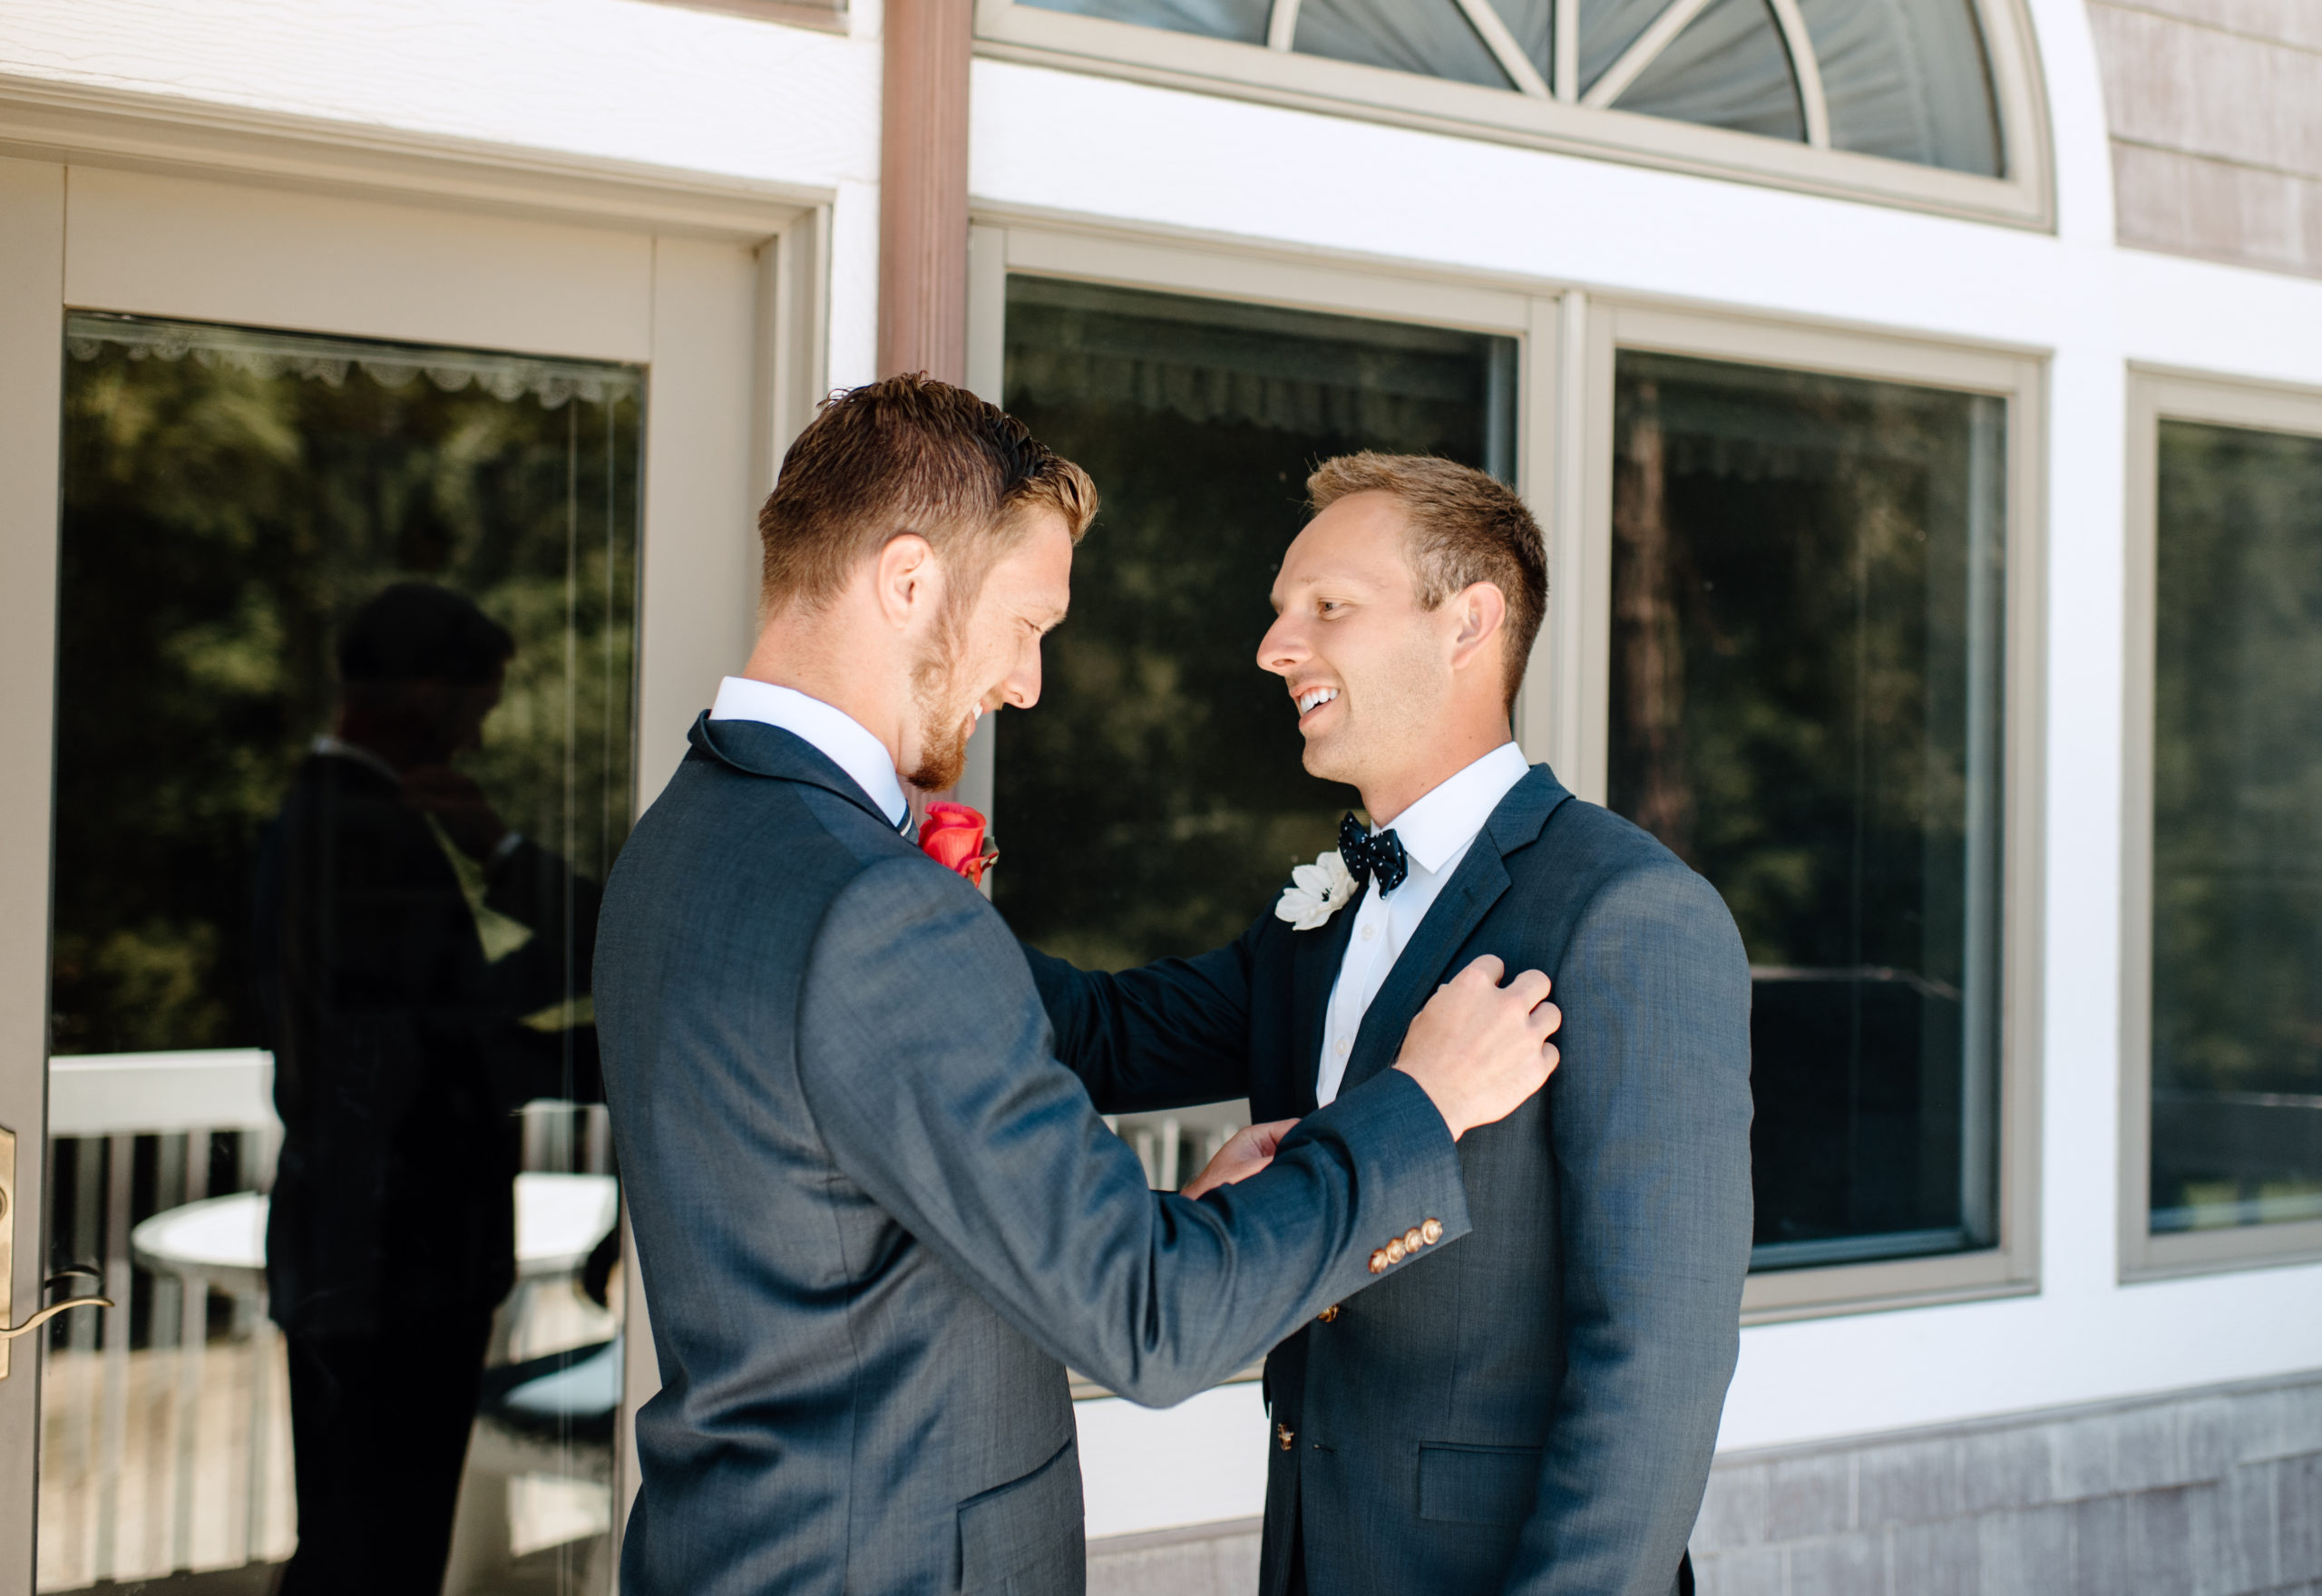 The groom and one of his groomsman at the Lake Arrowhead wedding